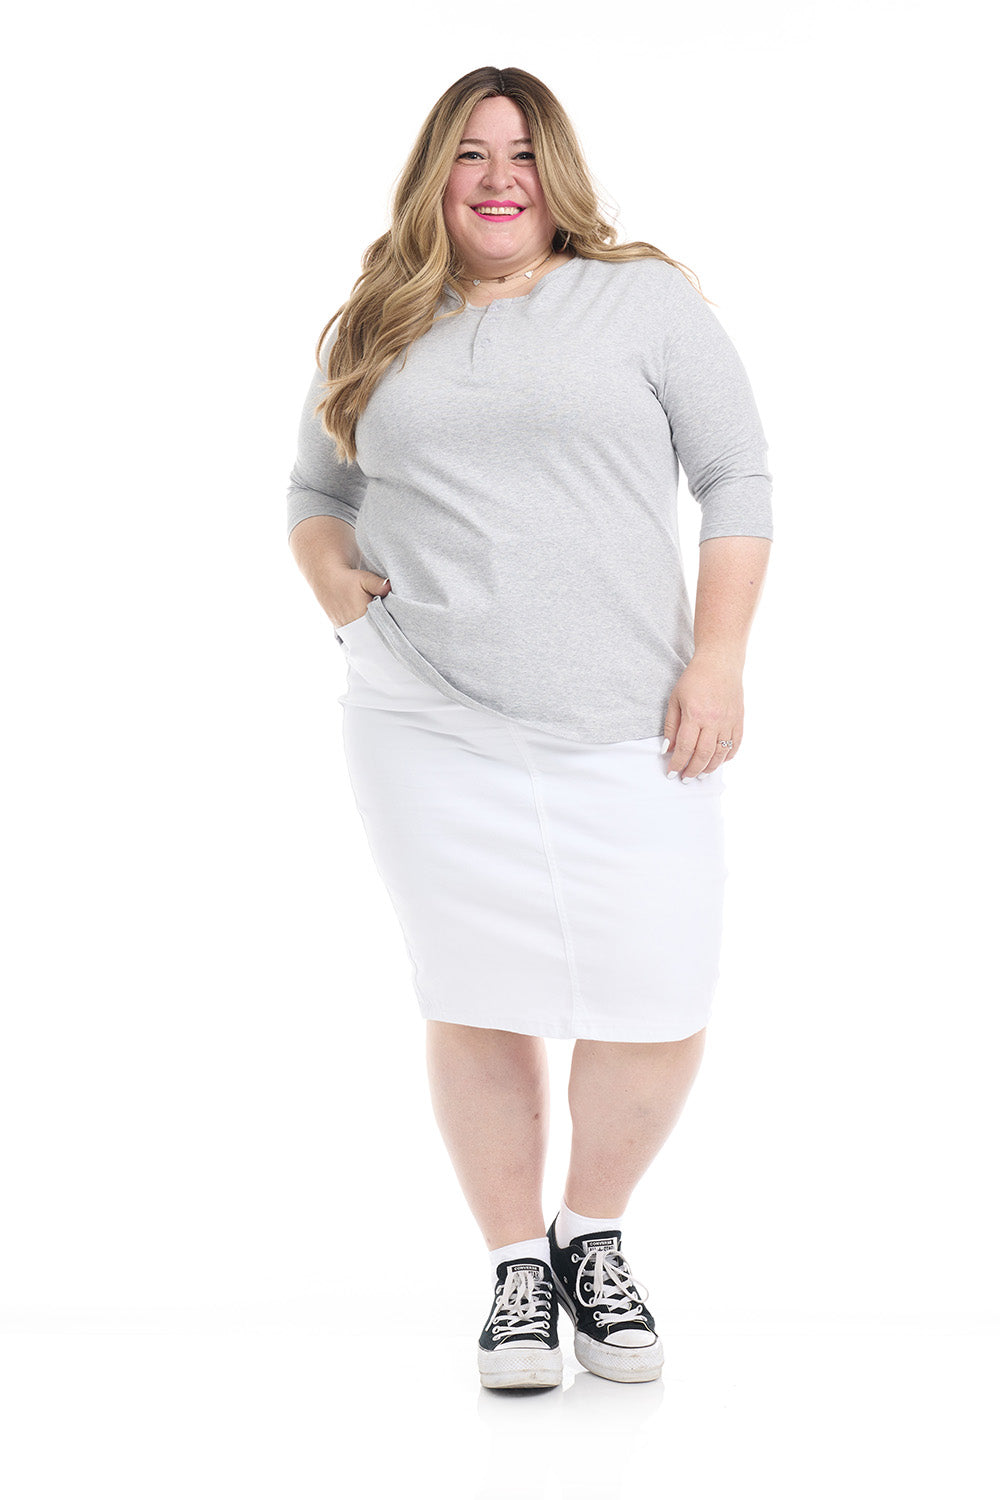 white stretchy modest knee length plus size jean skirt with pockets